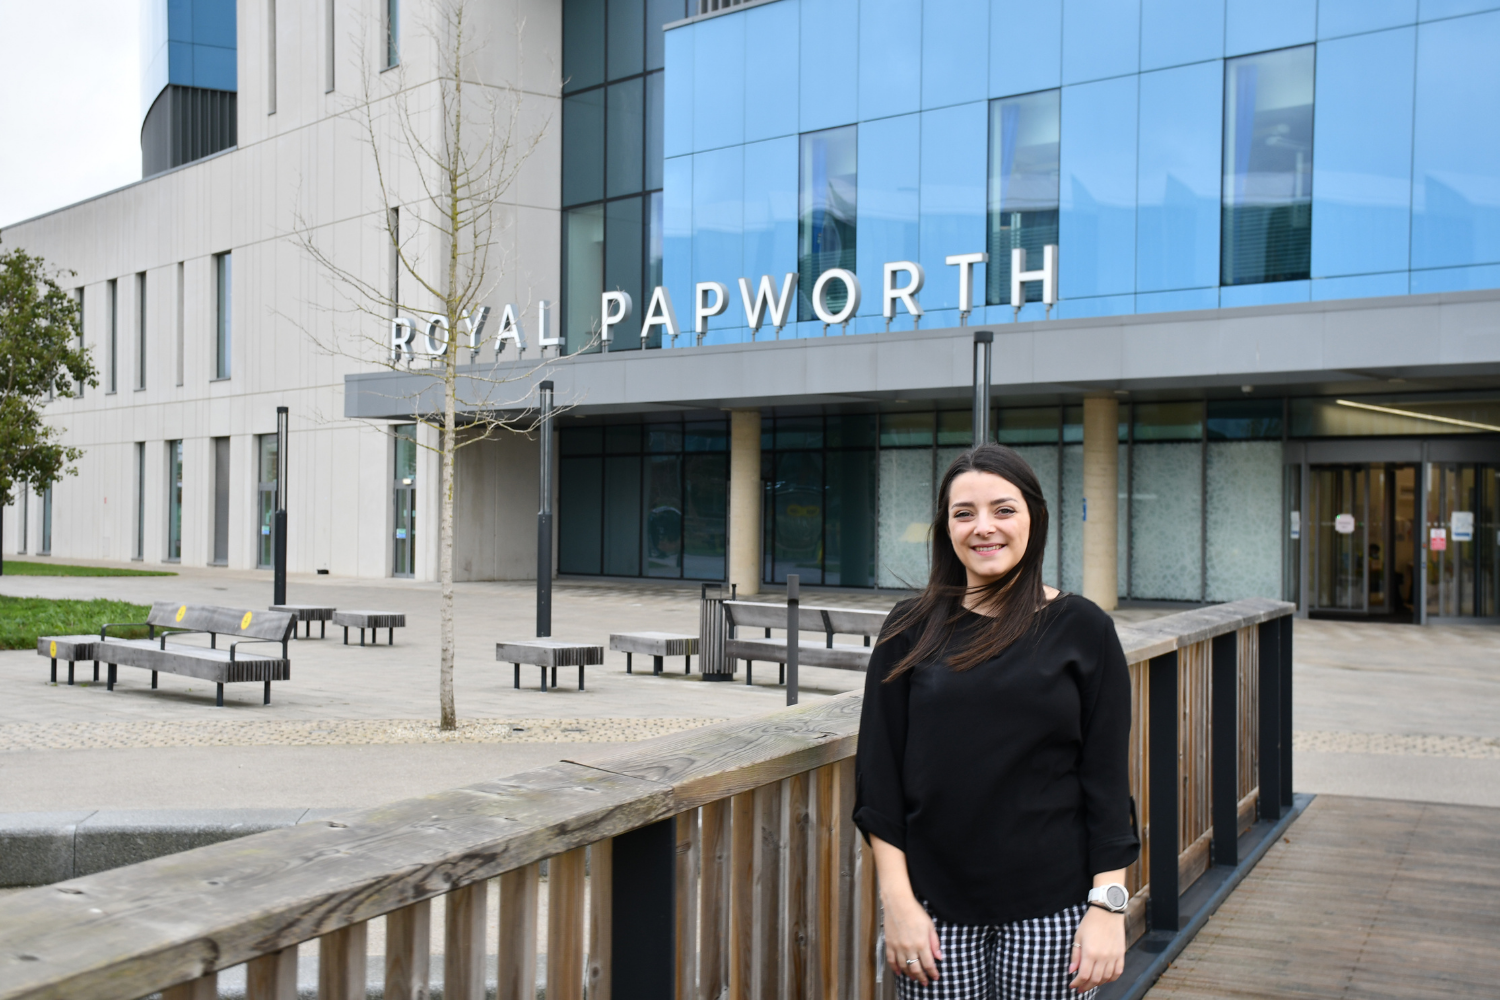 Sustainability officer, Hannah Greensill, standing outside the front entrance to Royal Papworth Hospital, leaning against the bridge and smiling.